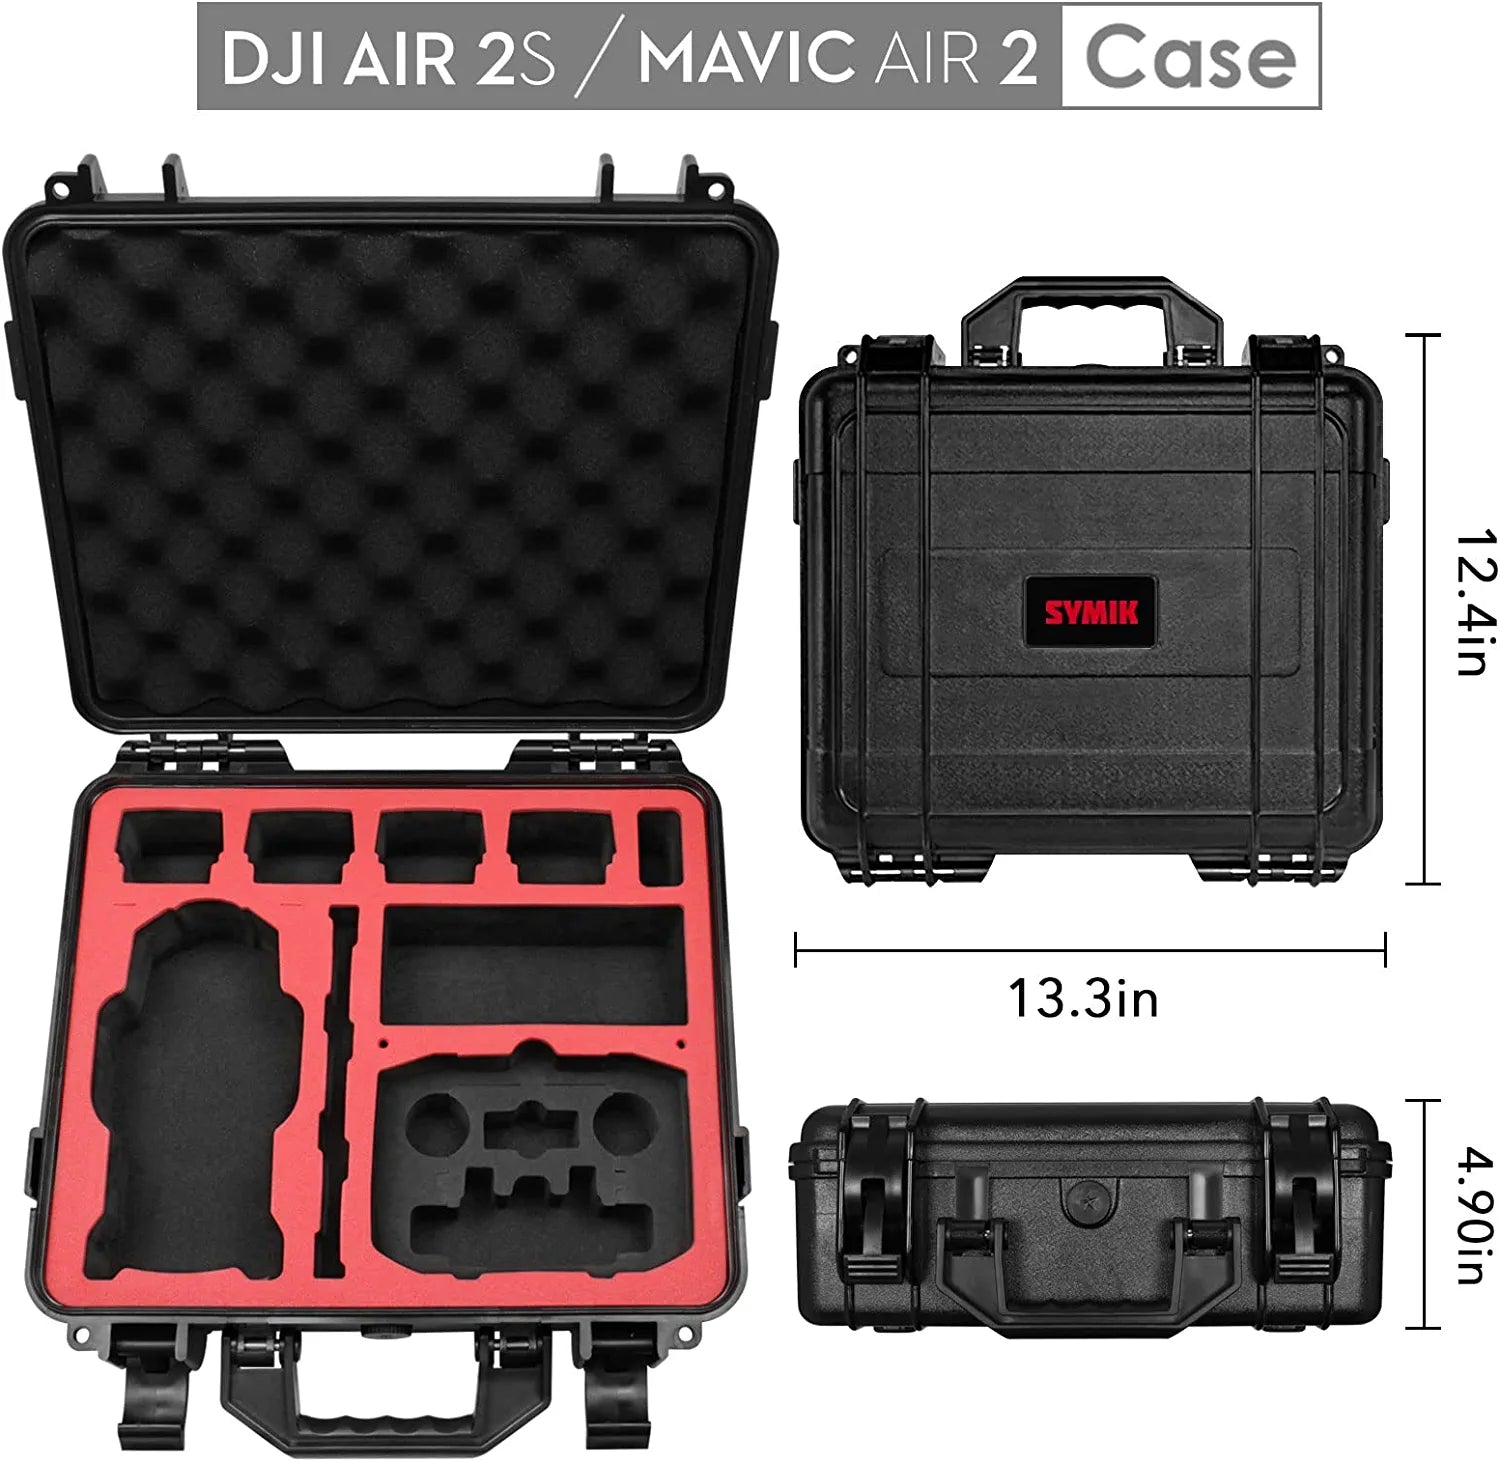 Waterproof Hard Carrying Case for DJI Air 2S / Mavic Air 2 Drone / Fly More Combo; Rugged Professional Case with Complete Protection